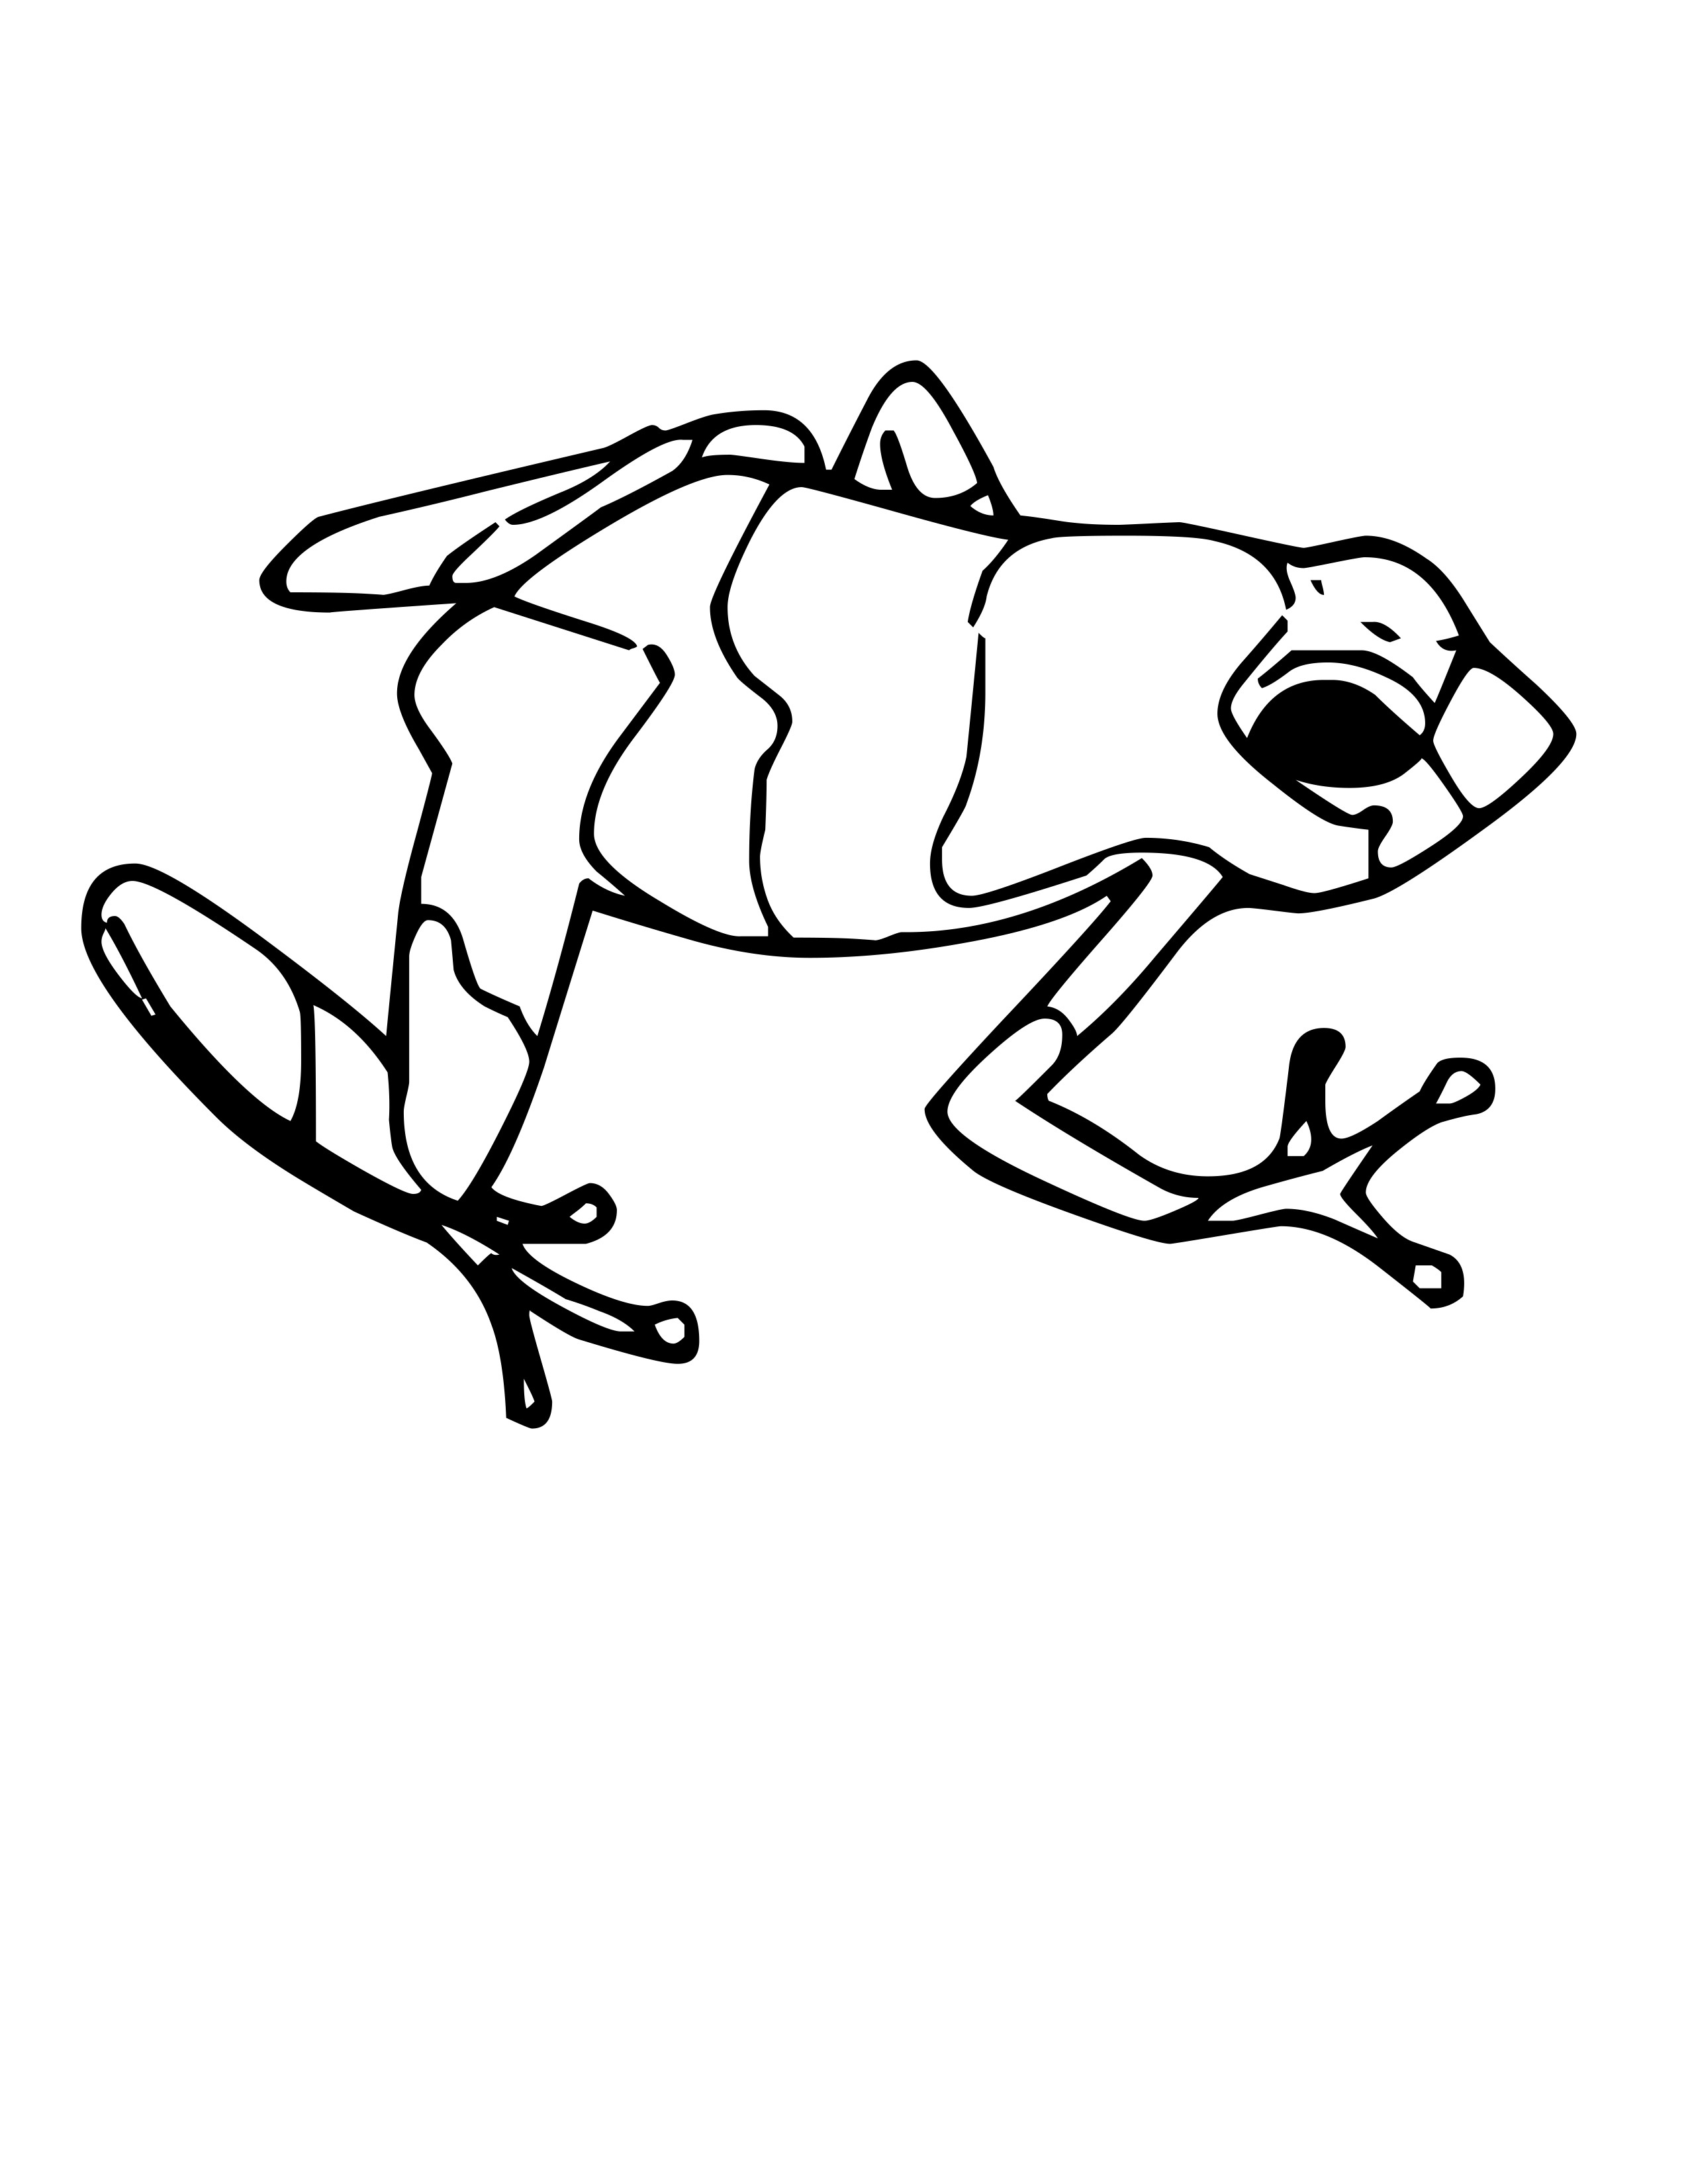 Frog black and white poison dart frog clipart black and